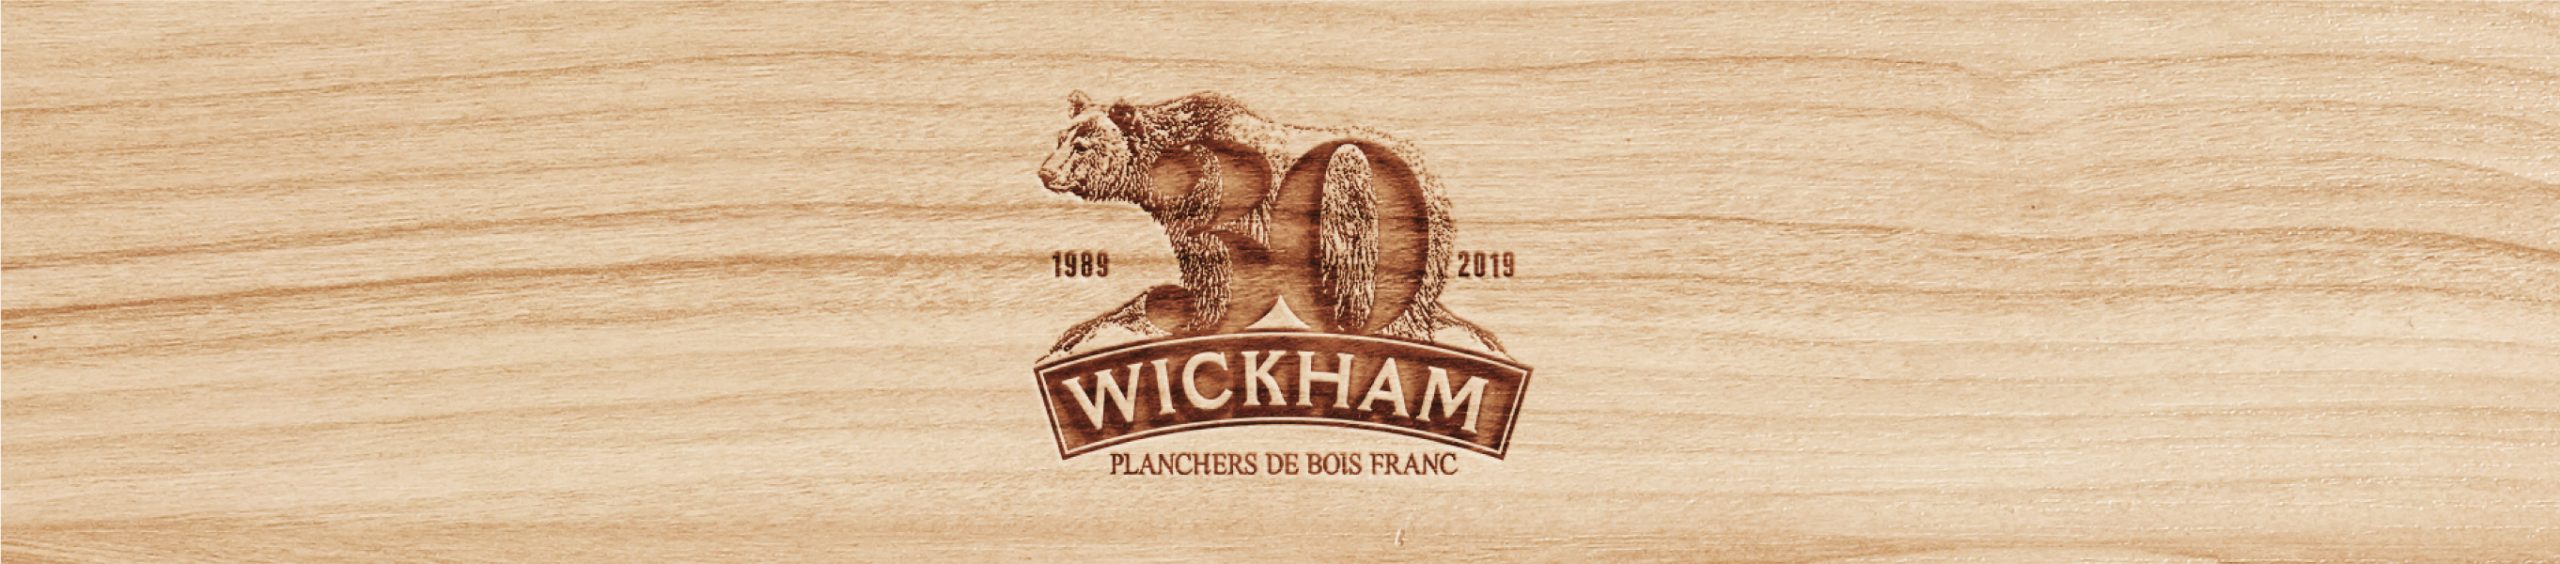 The 30-year history of success of Wickham Flooring is marked with a drive to succeed and innovate by offering the best quality product at a fair price, by meeting exacting standards of customer service, and by relying on the expertise of our trustworthy staff. These same qualities will enable us to move forward and expand our development for many years to come.